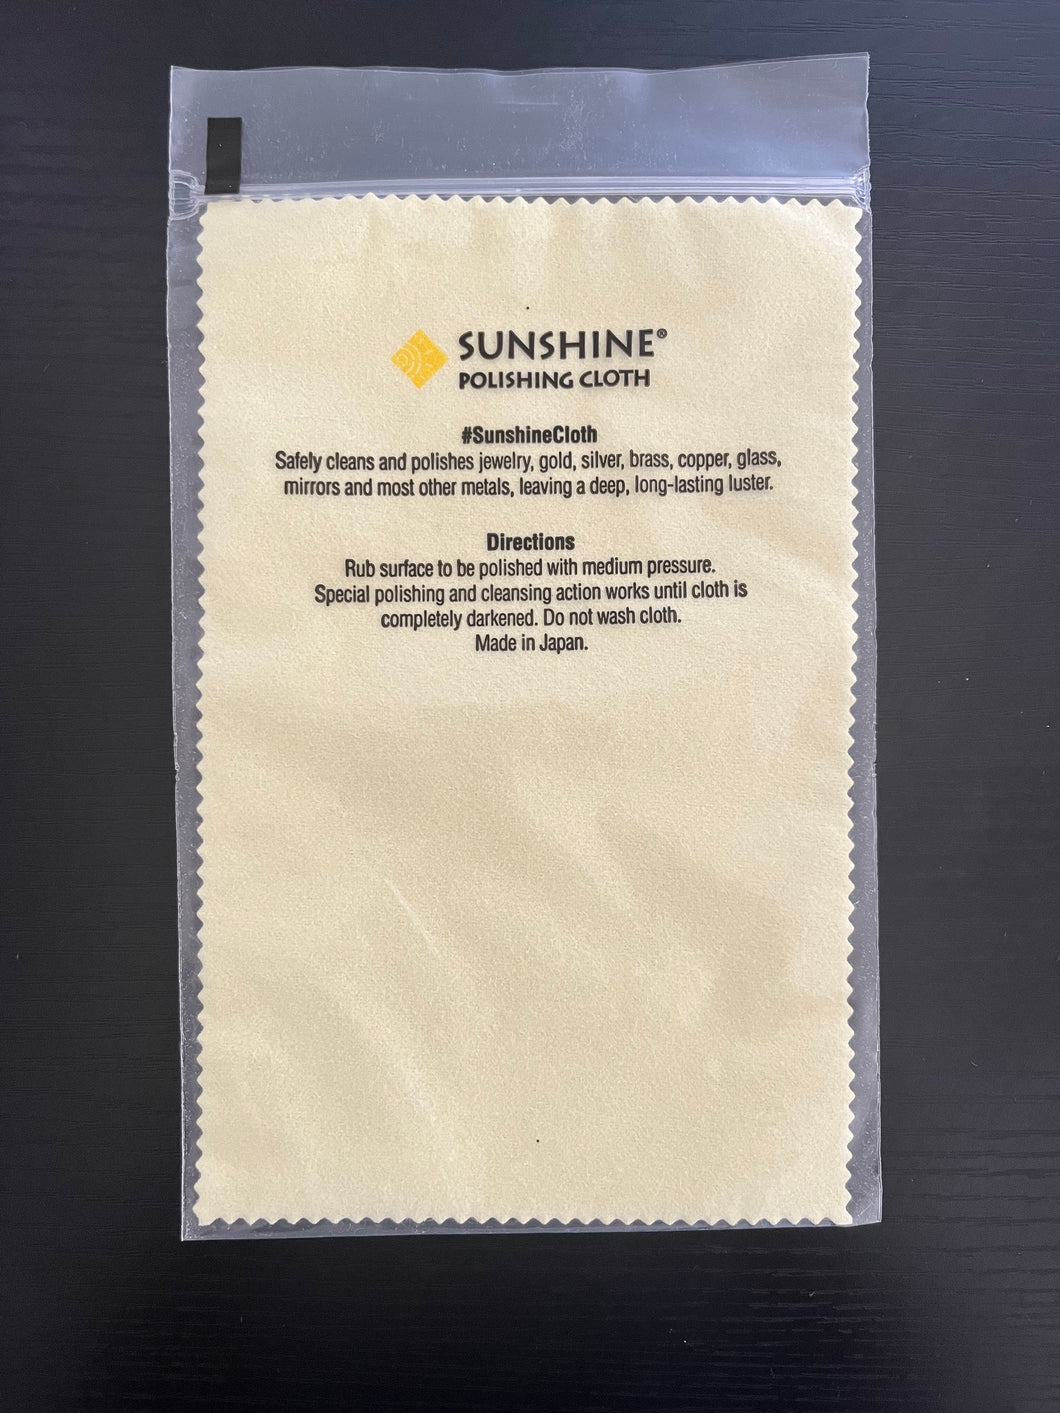 Sunshine polishing cloth used for cleaning jewelry.